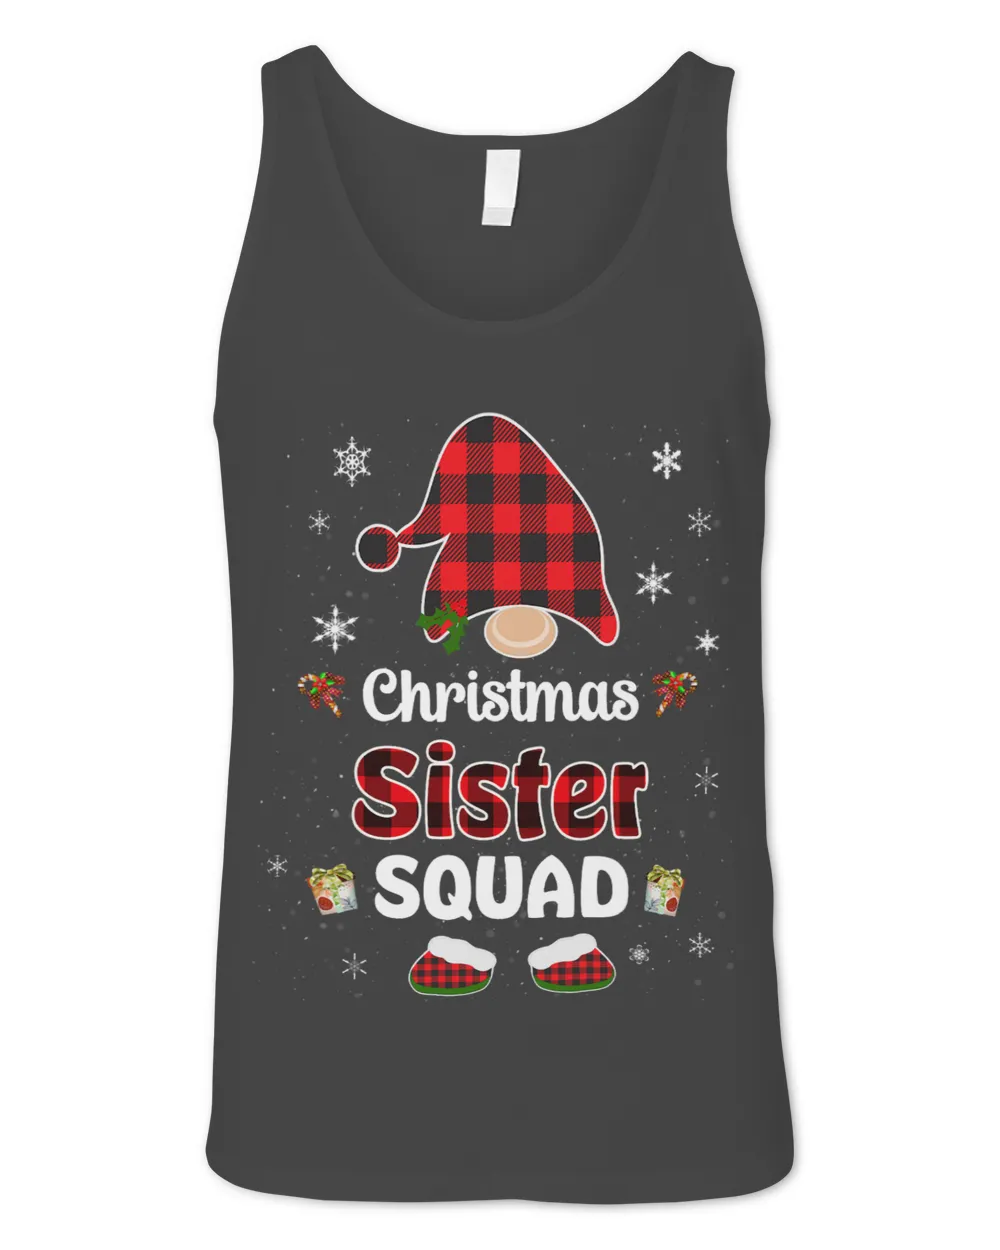 Christmas Sister squad family group matching red plaid